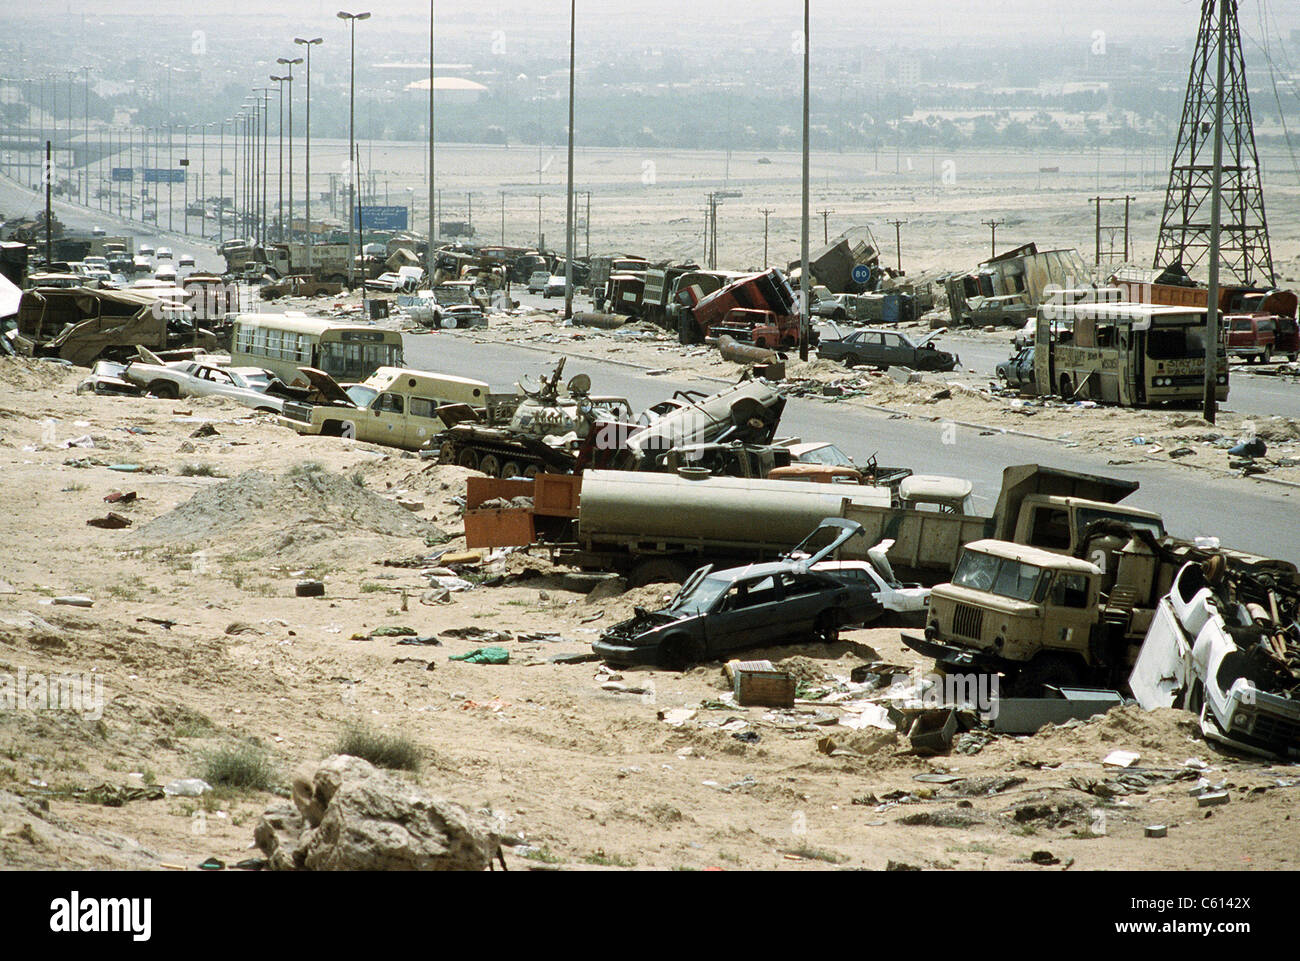 Demolished vehicles line Highway 80 the 'Highway of Death' were destroyed as Iraqi forces retreated from Kuwait during Operation Desert Storm. April 8 1991 (BSLOC 2011 3 15) Stock Photo